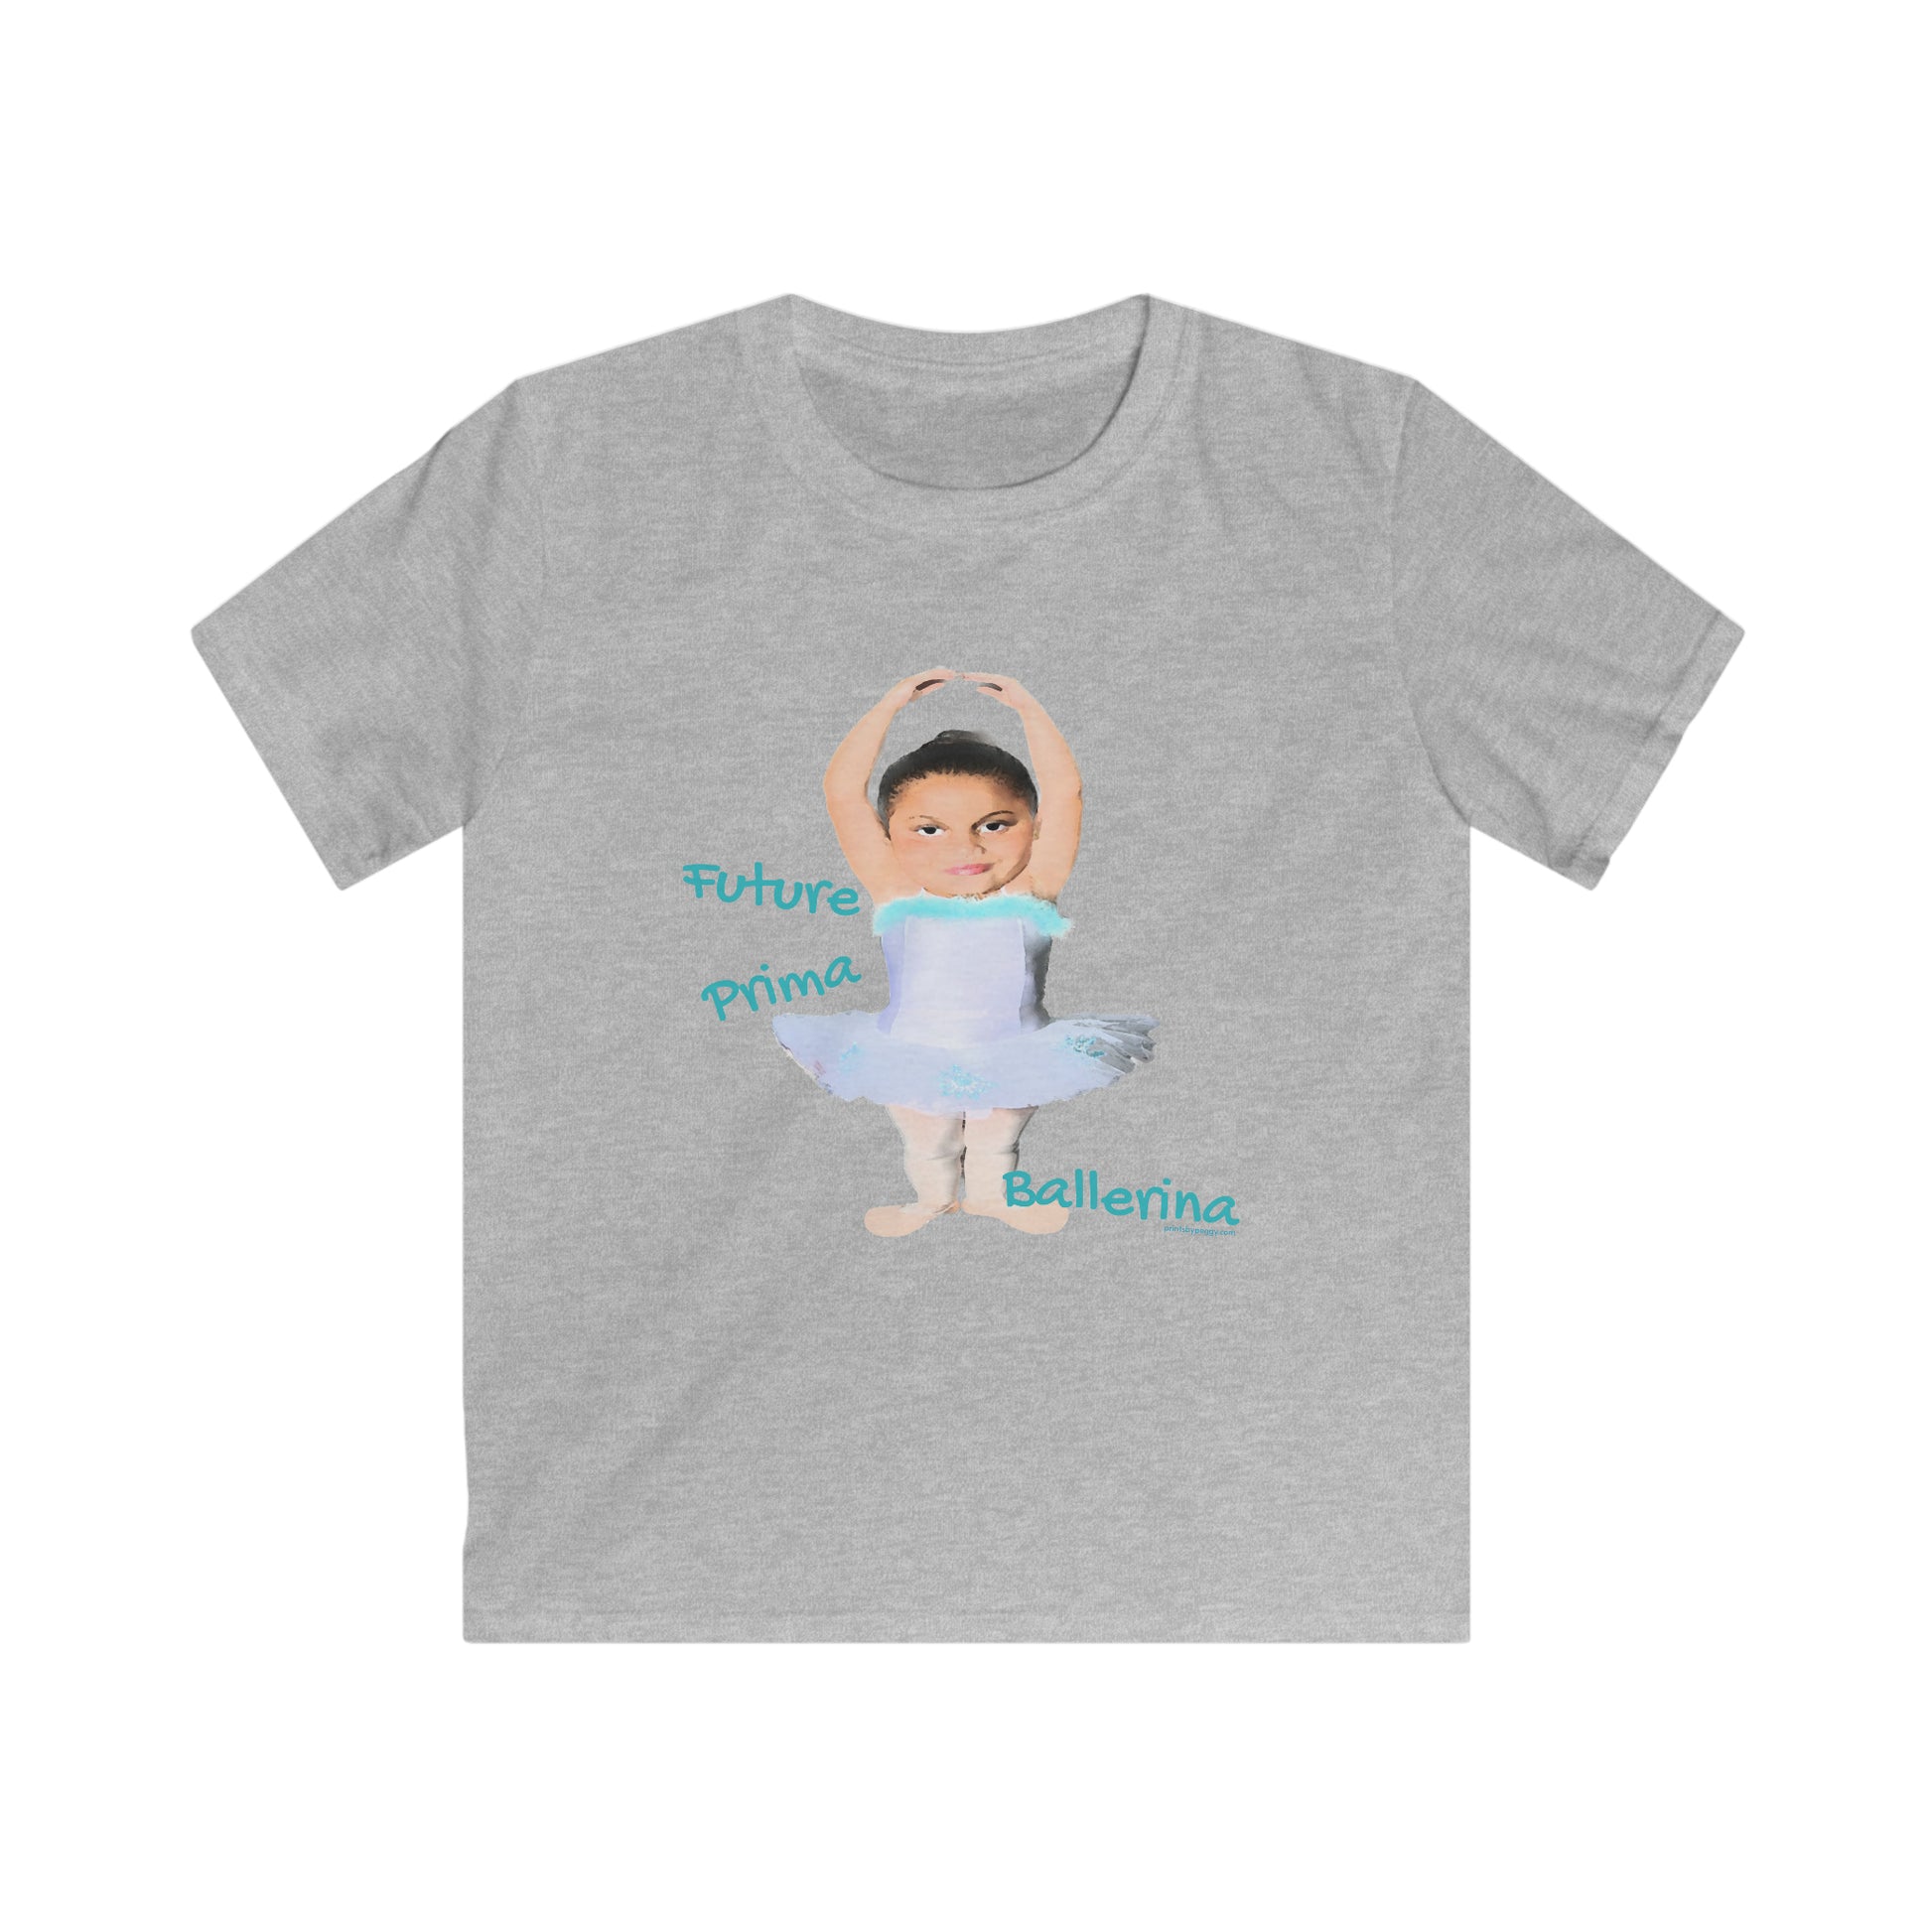 The back view of a gray tee shirt with a charachature of a little ballerina pictured with Future Prima Ballerina written in Blue